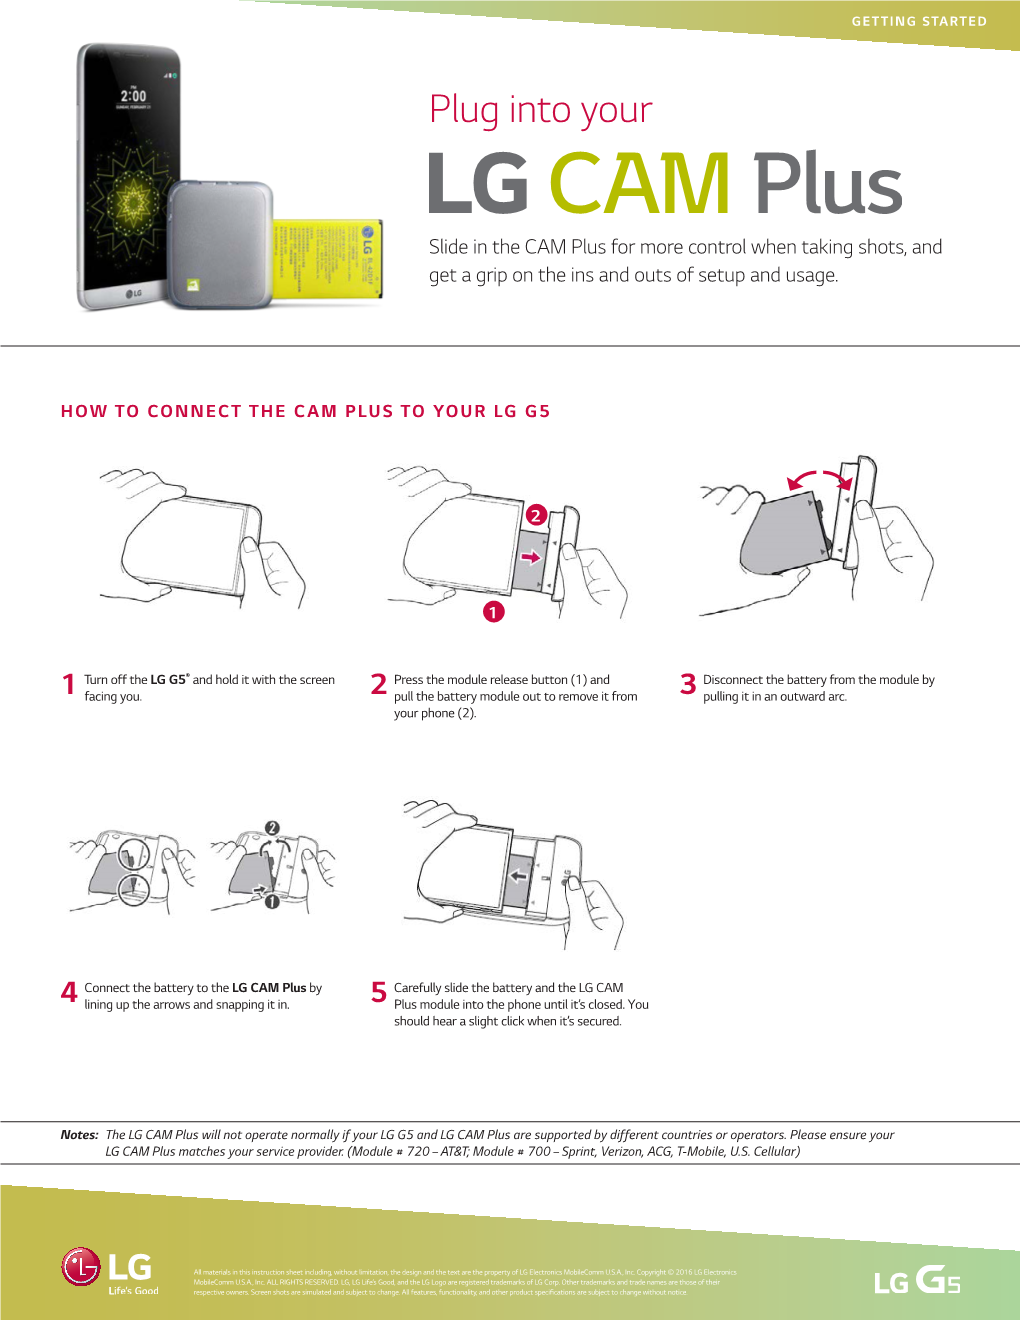 4 Connect the Battery to the LG CAM Plus By